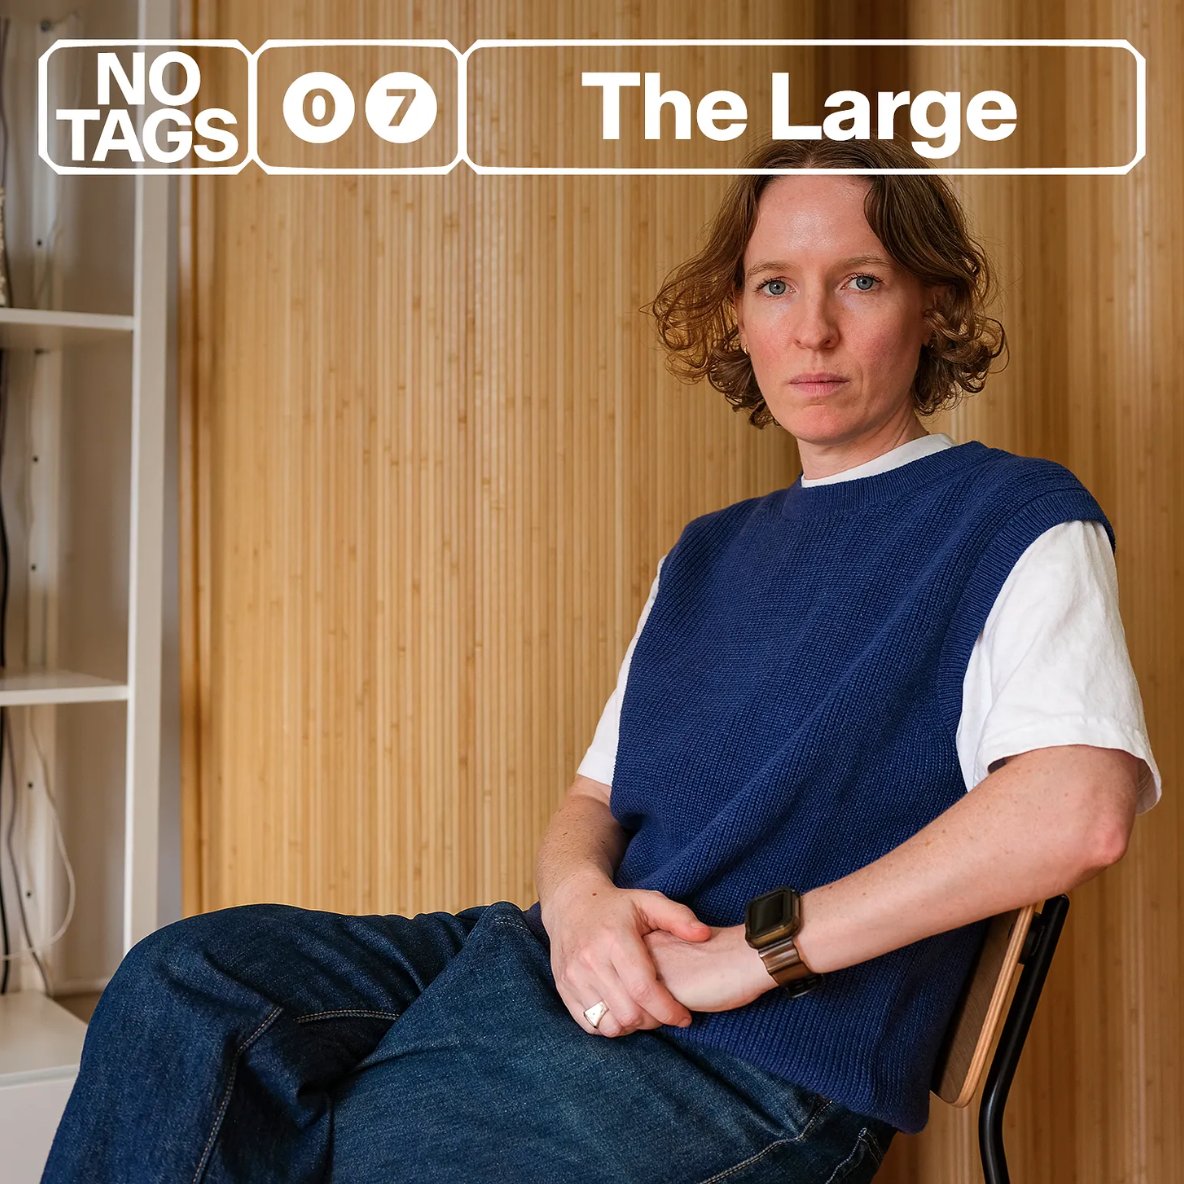 on episode 07 of @notagspodcast we talk to soundclash champion and industry oracle The Large (@itsthelarge) about Popcaan, Mixpak, Dalston, and the future of global pop...
notags.lnk.to/podcast